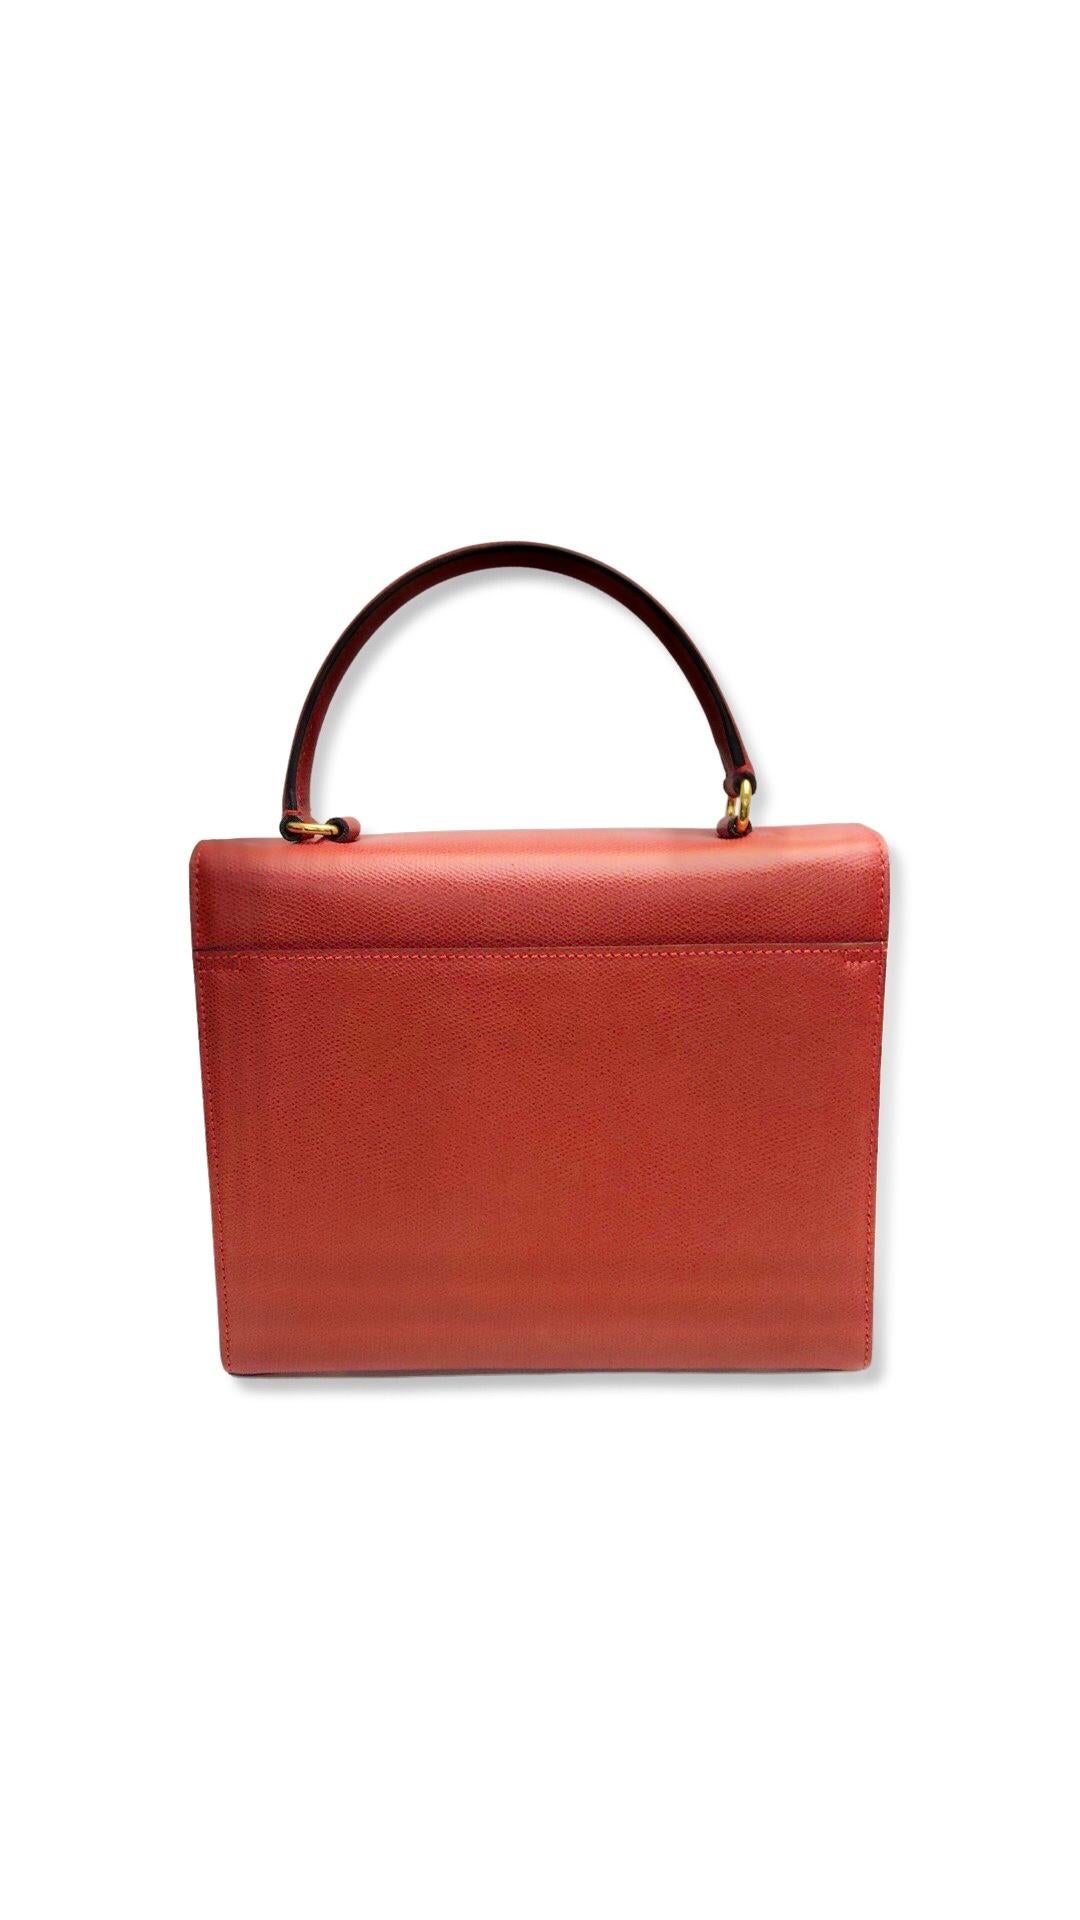 Celine Red Leather Box Handbag In Good Condition For Sale In Sheung Wan, HK